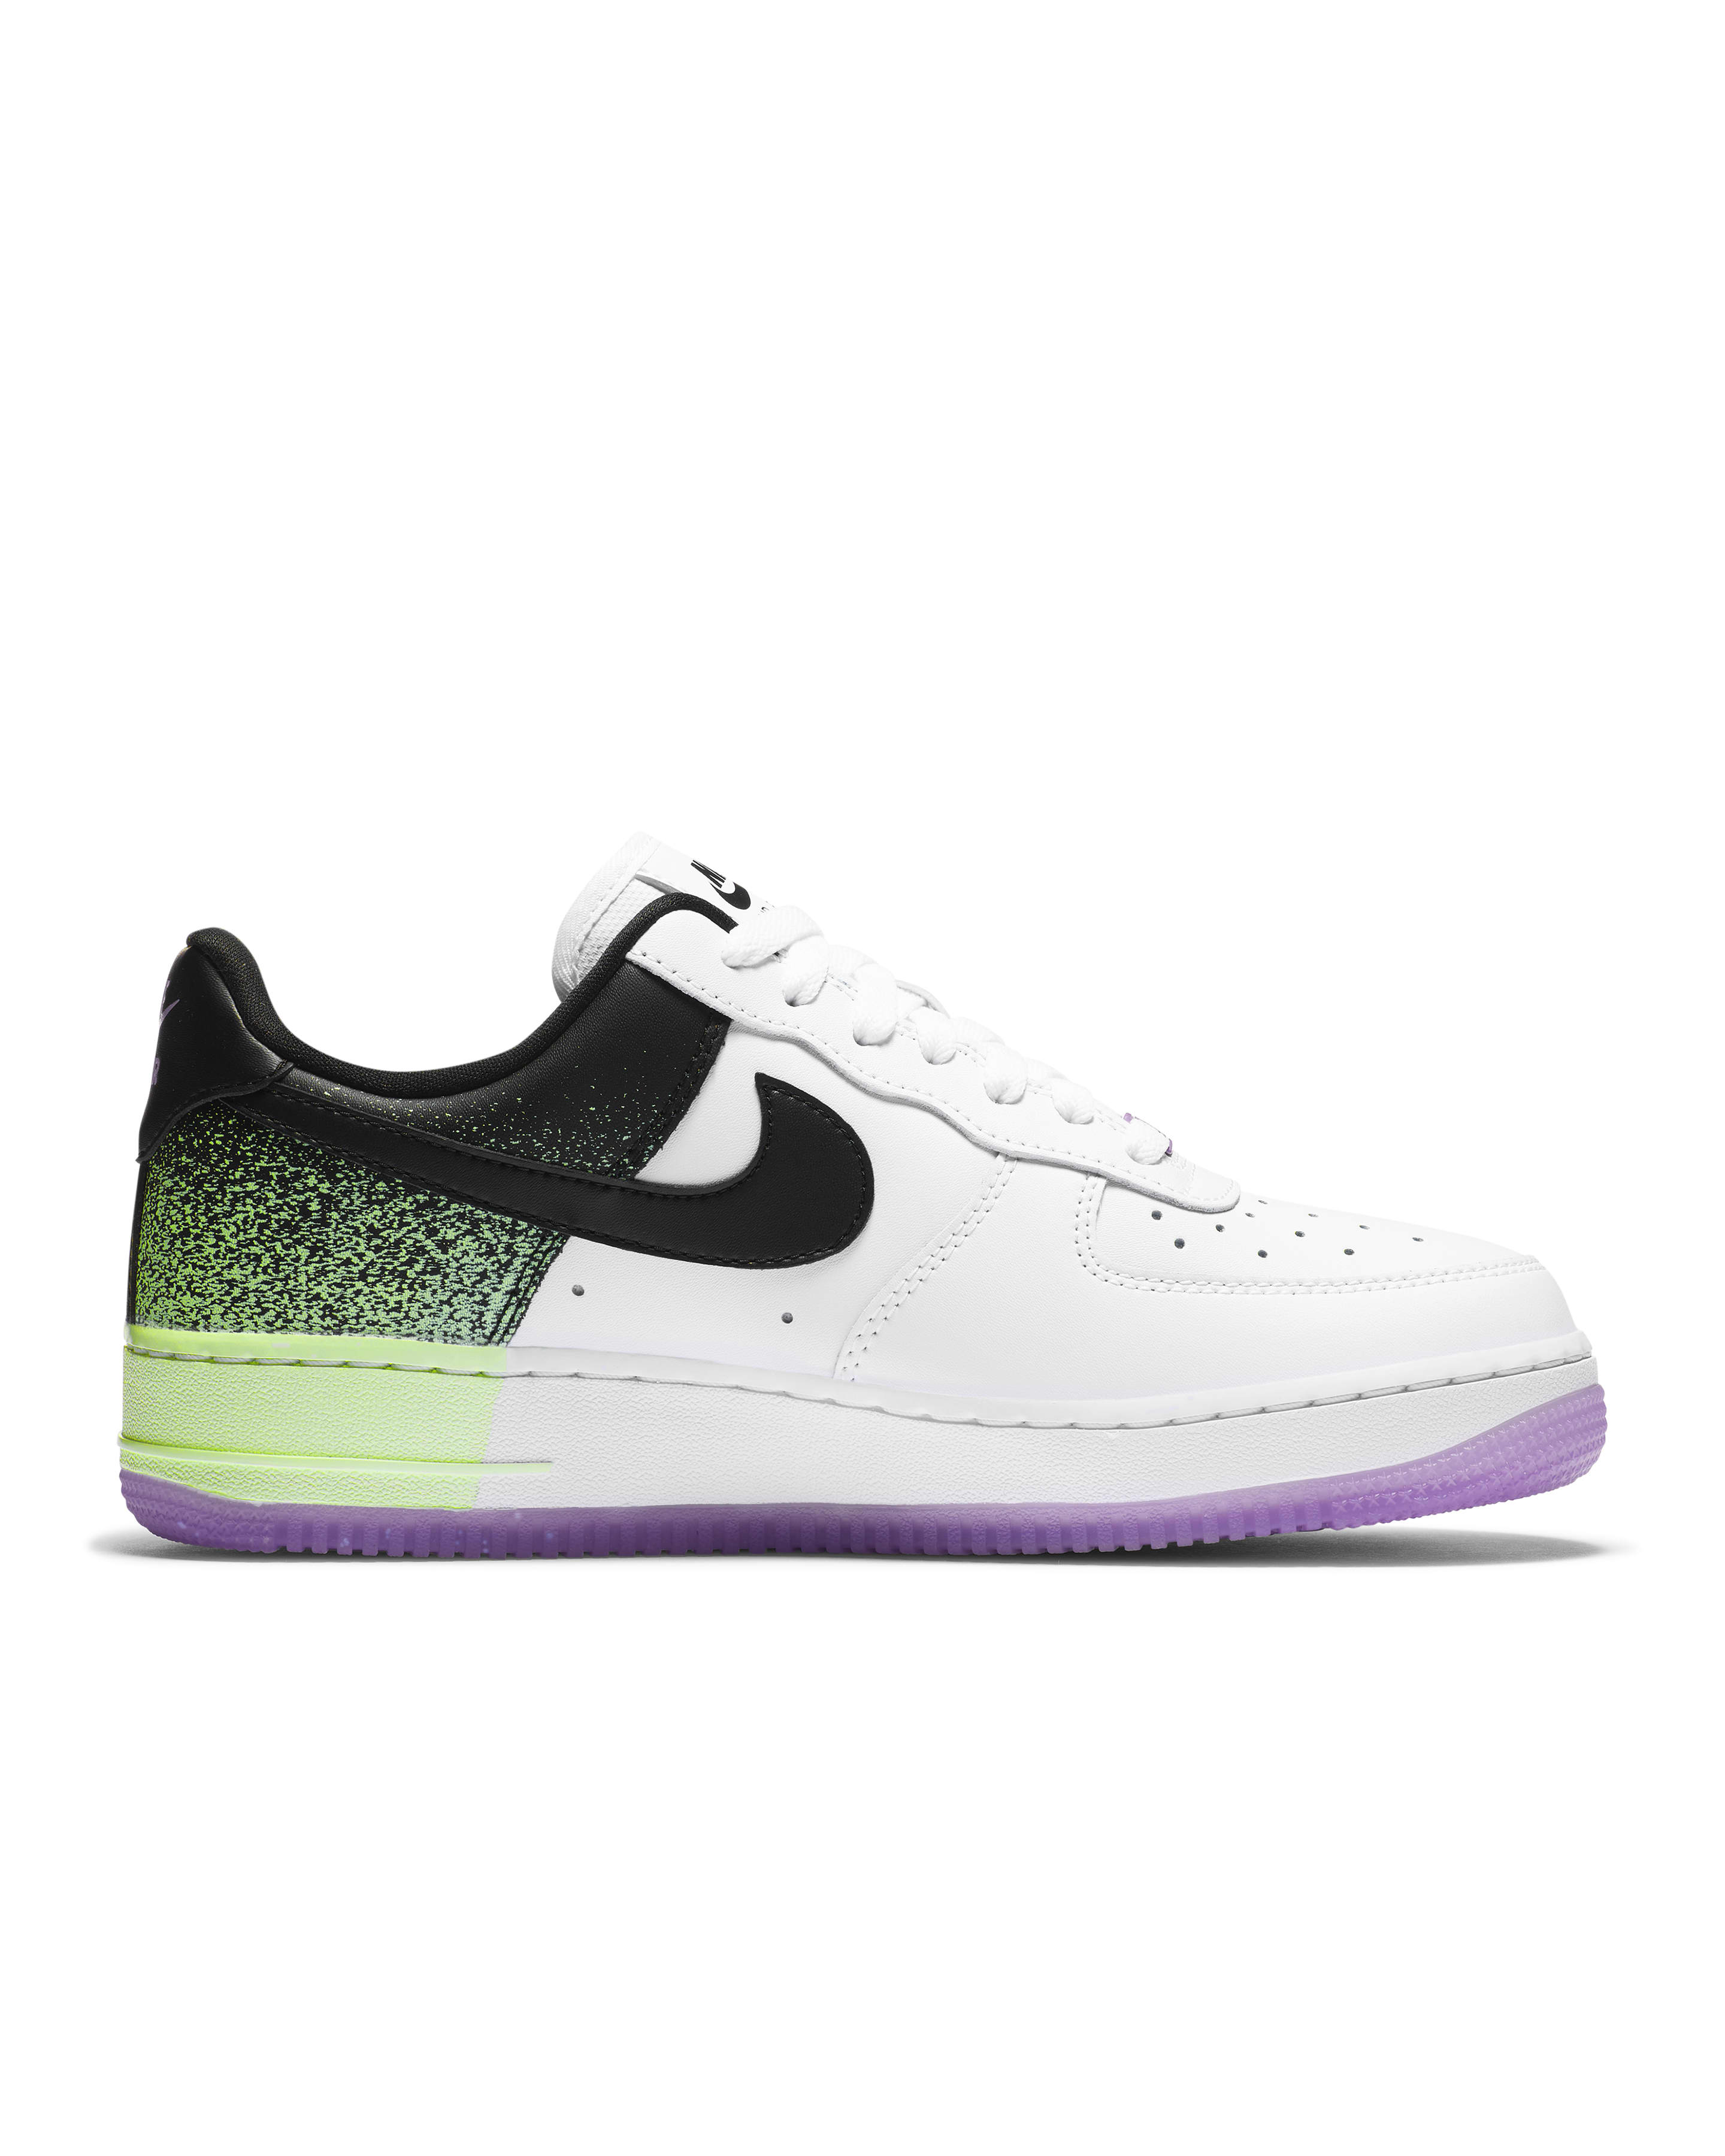 Foot Locker Middle East - The Nike Air Force 1 Sees Splashes Of